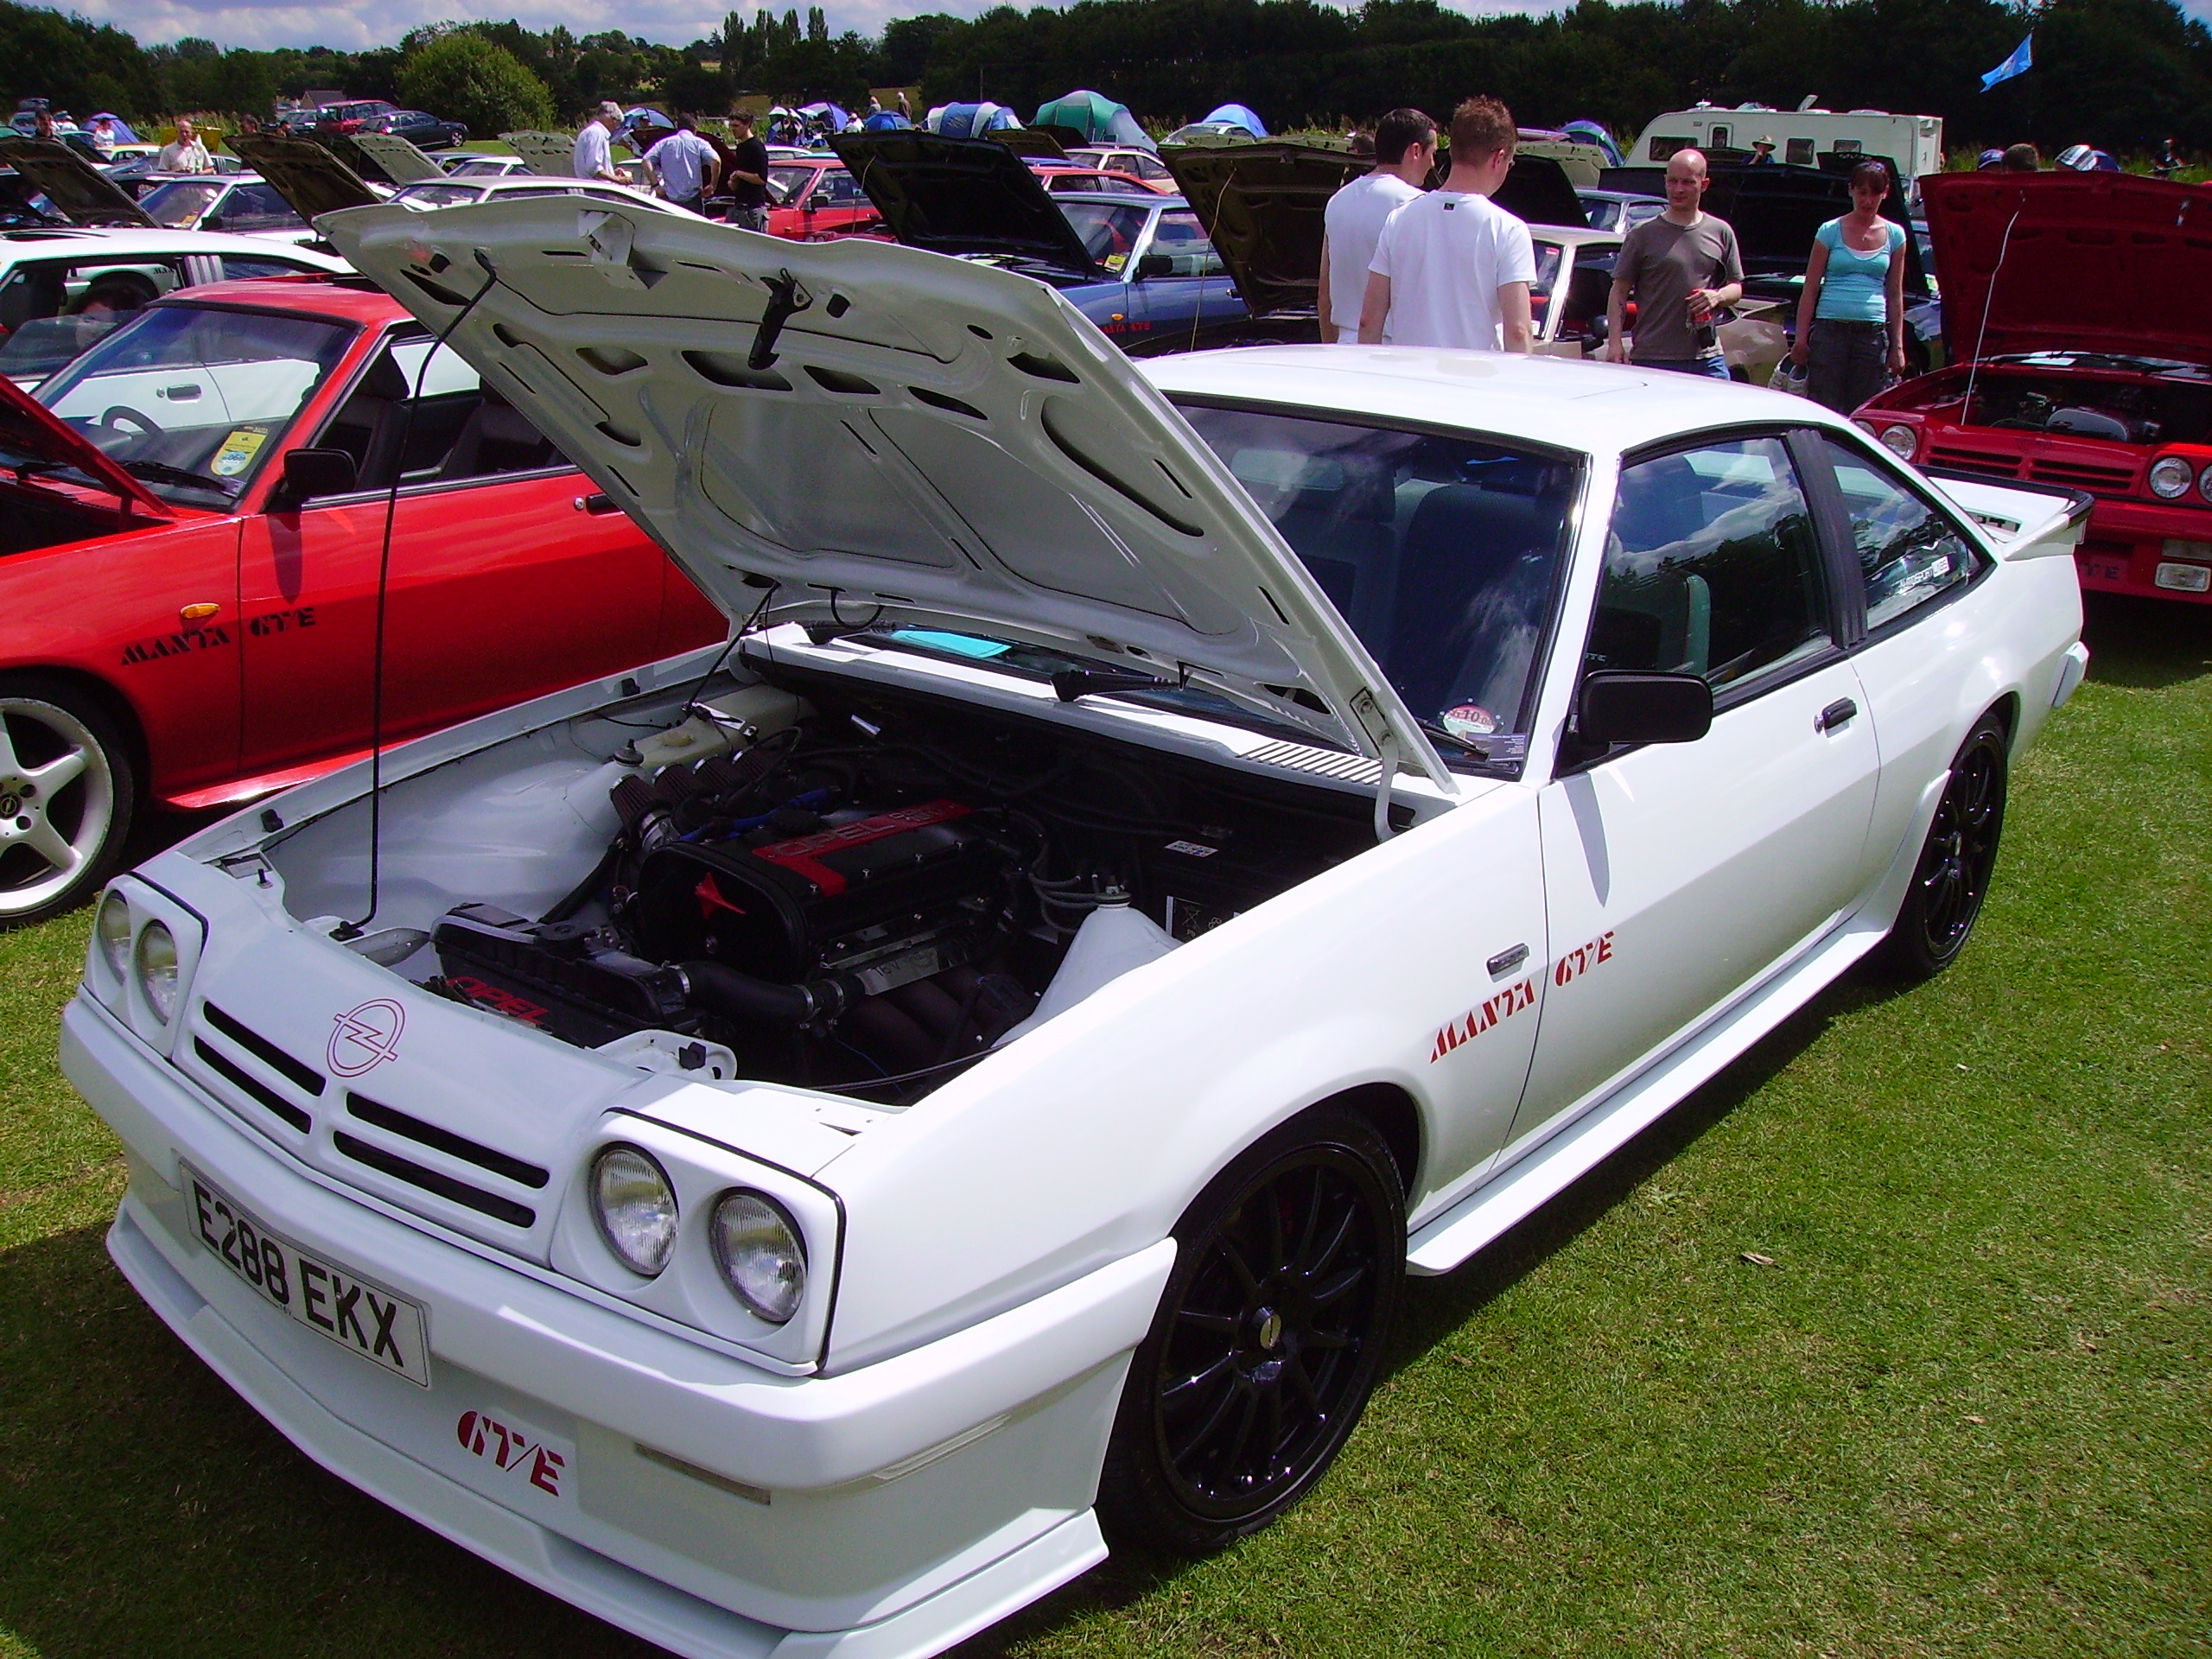 Opel Manta B 1975-1988. F/R. The second car to use the Manta name was